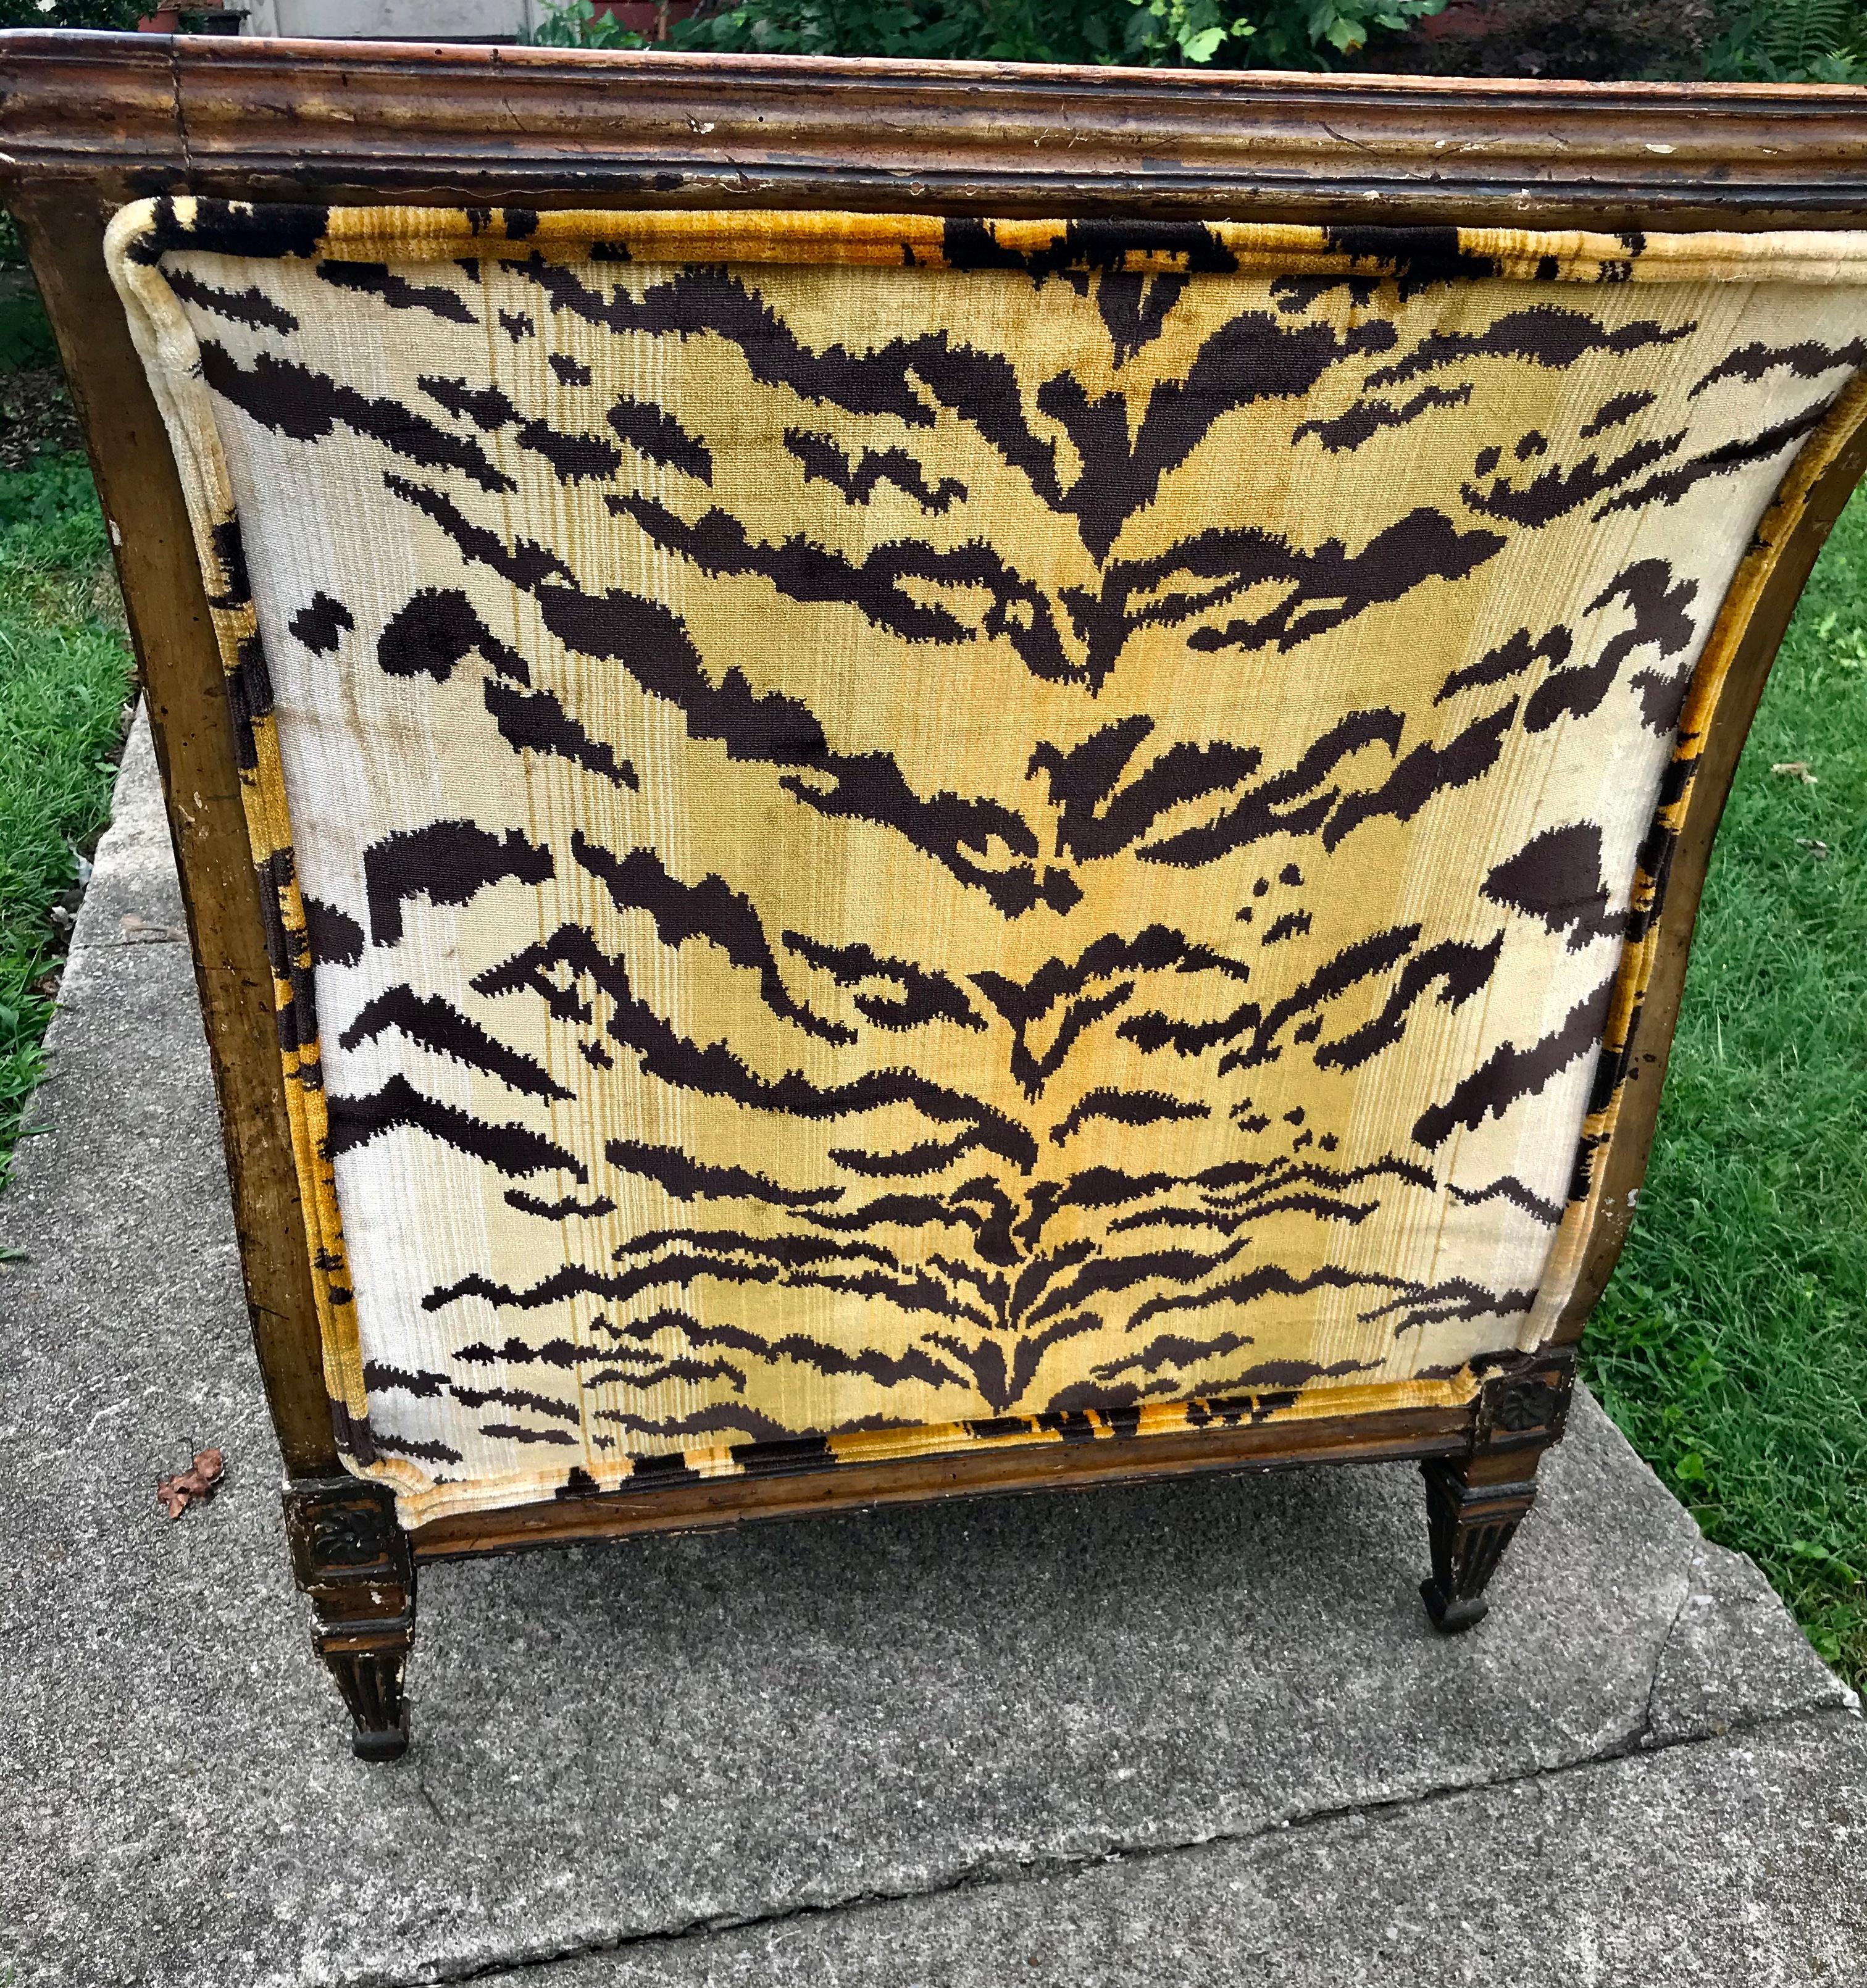 Late 18th Century Large Italian Neoclassical Giltwood Récamier Settee in Scalamandré Tiger Velvet For Sale